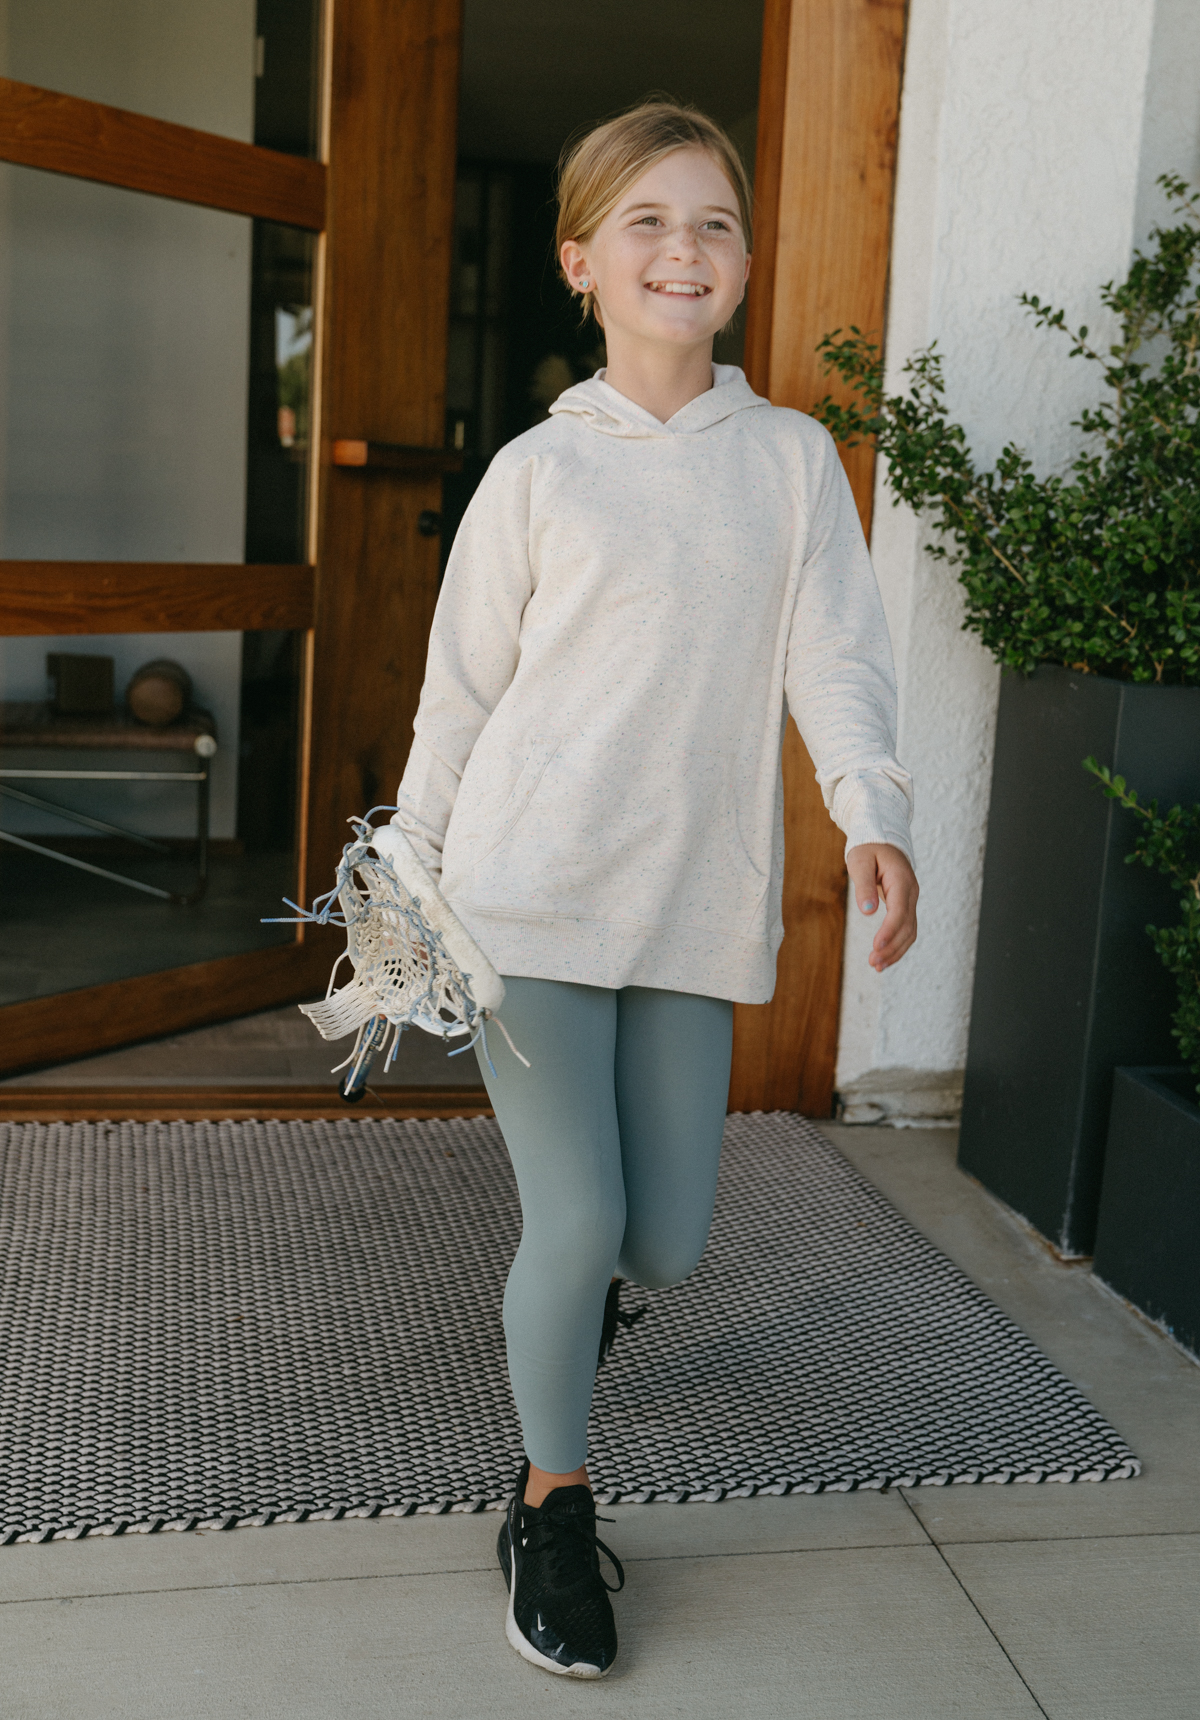 Back To School With Athleta